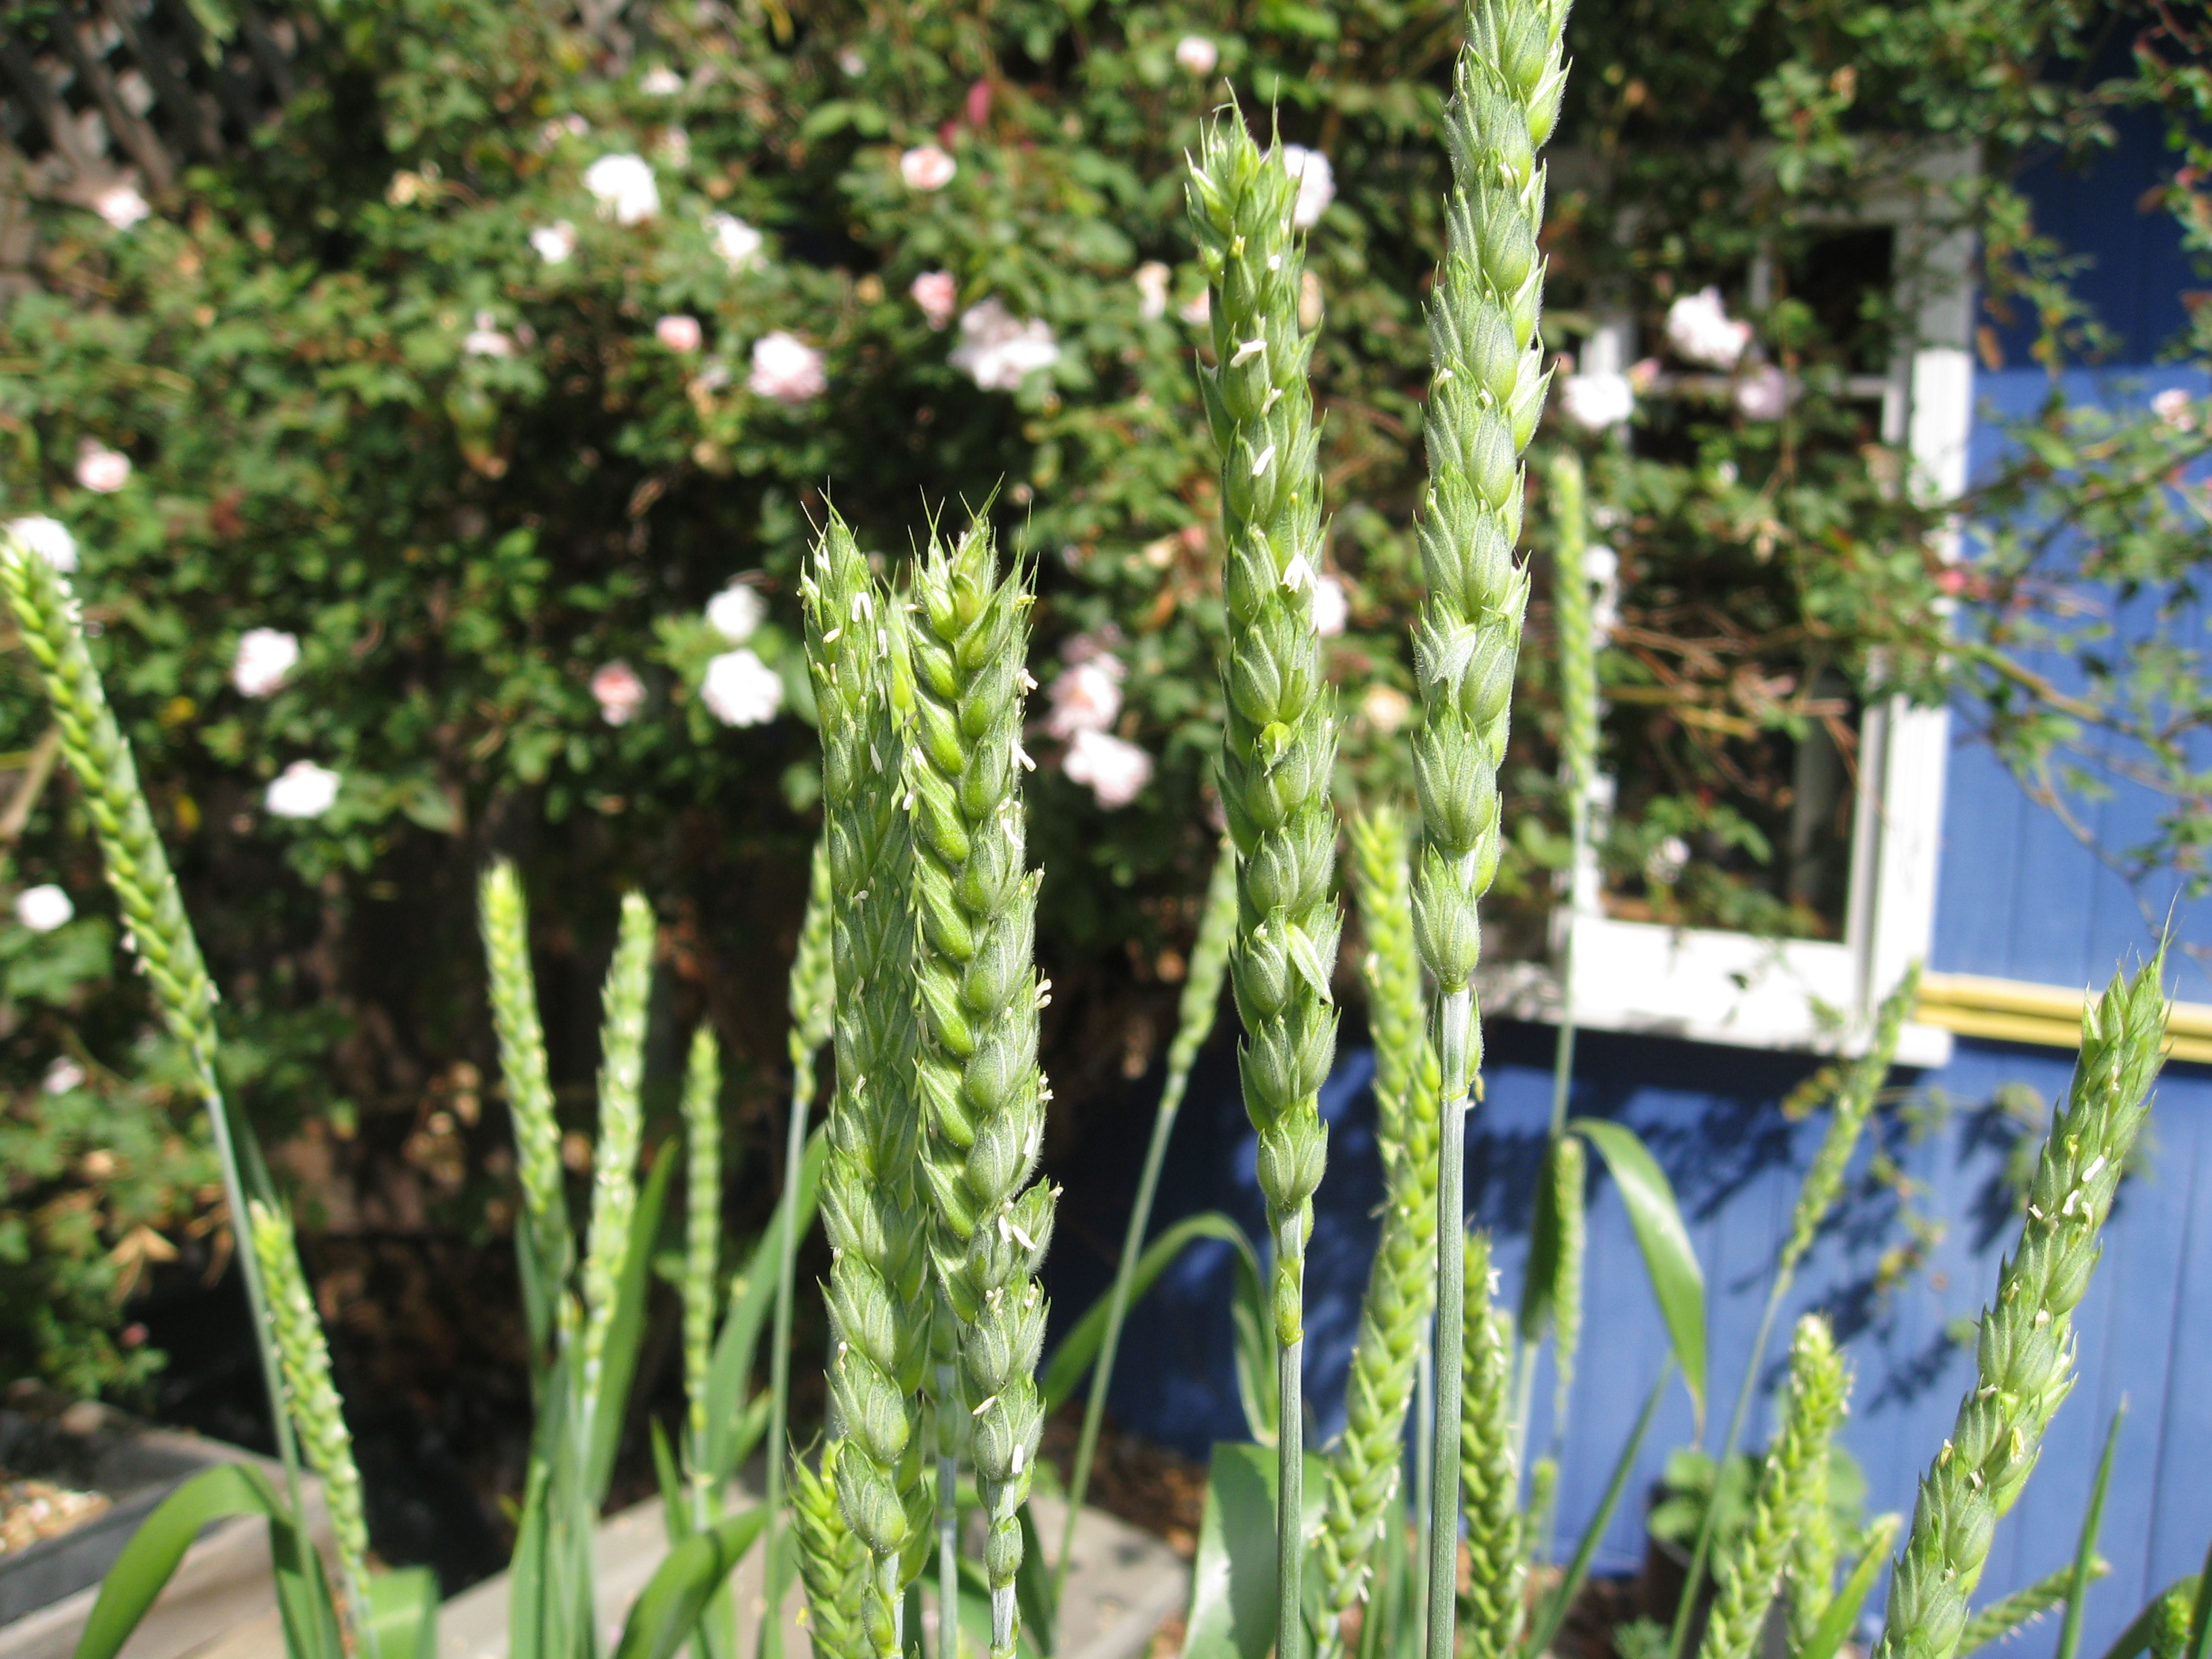 White Sonora wheat rises up for pollination.